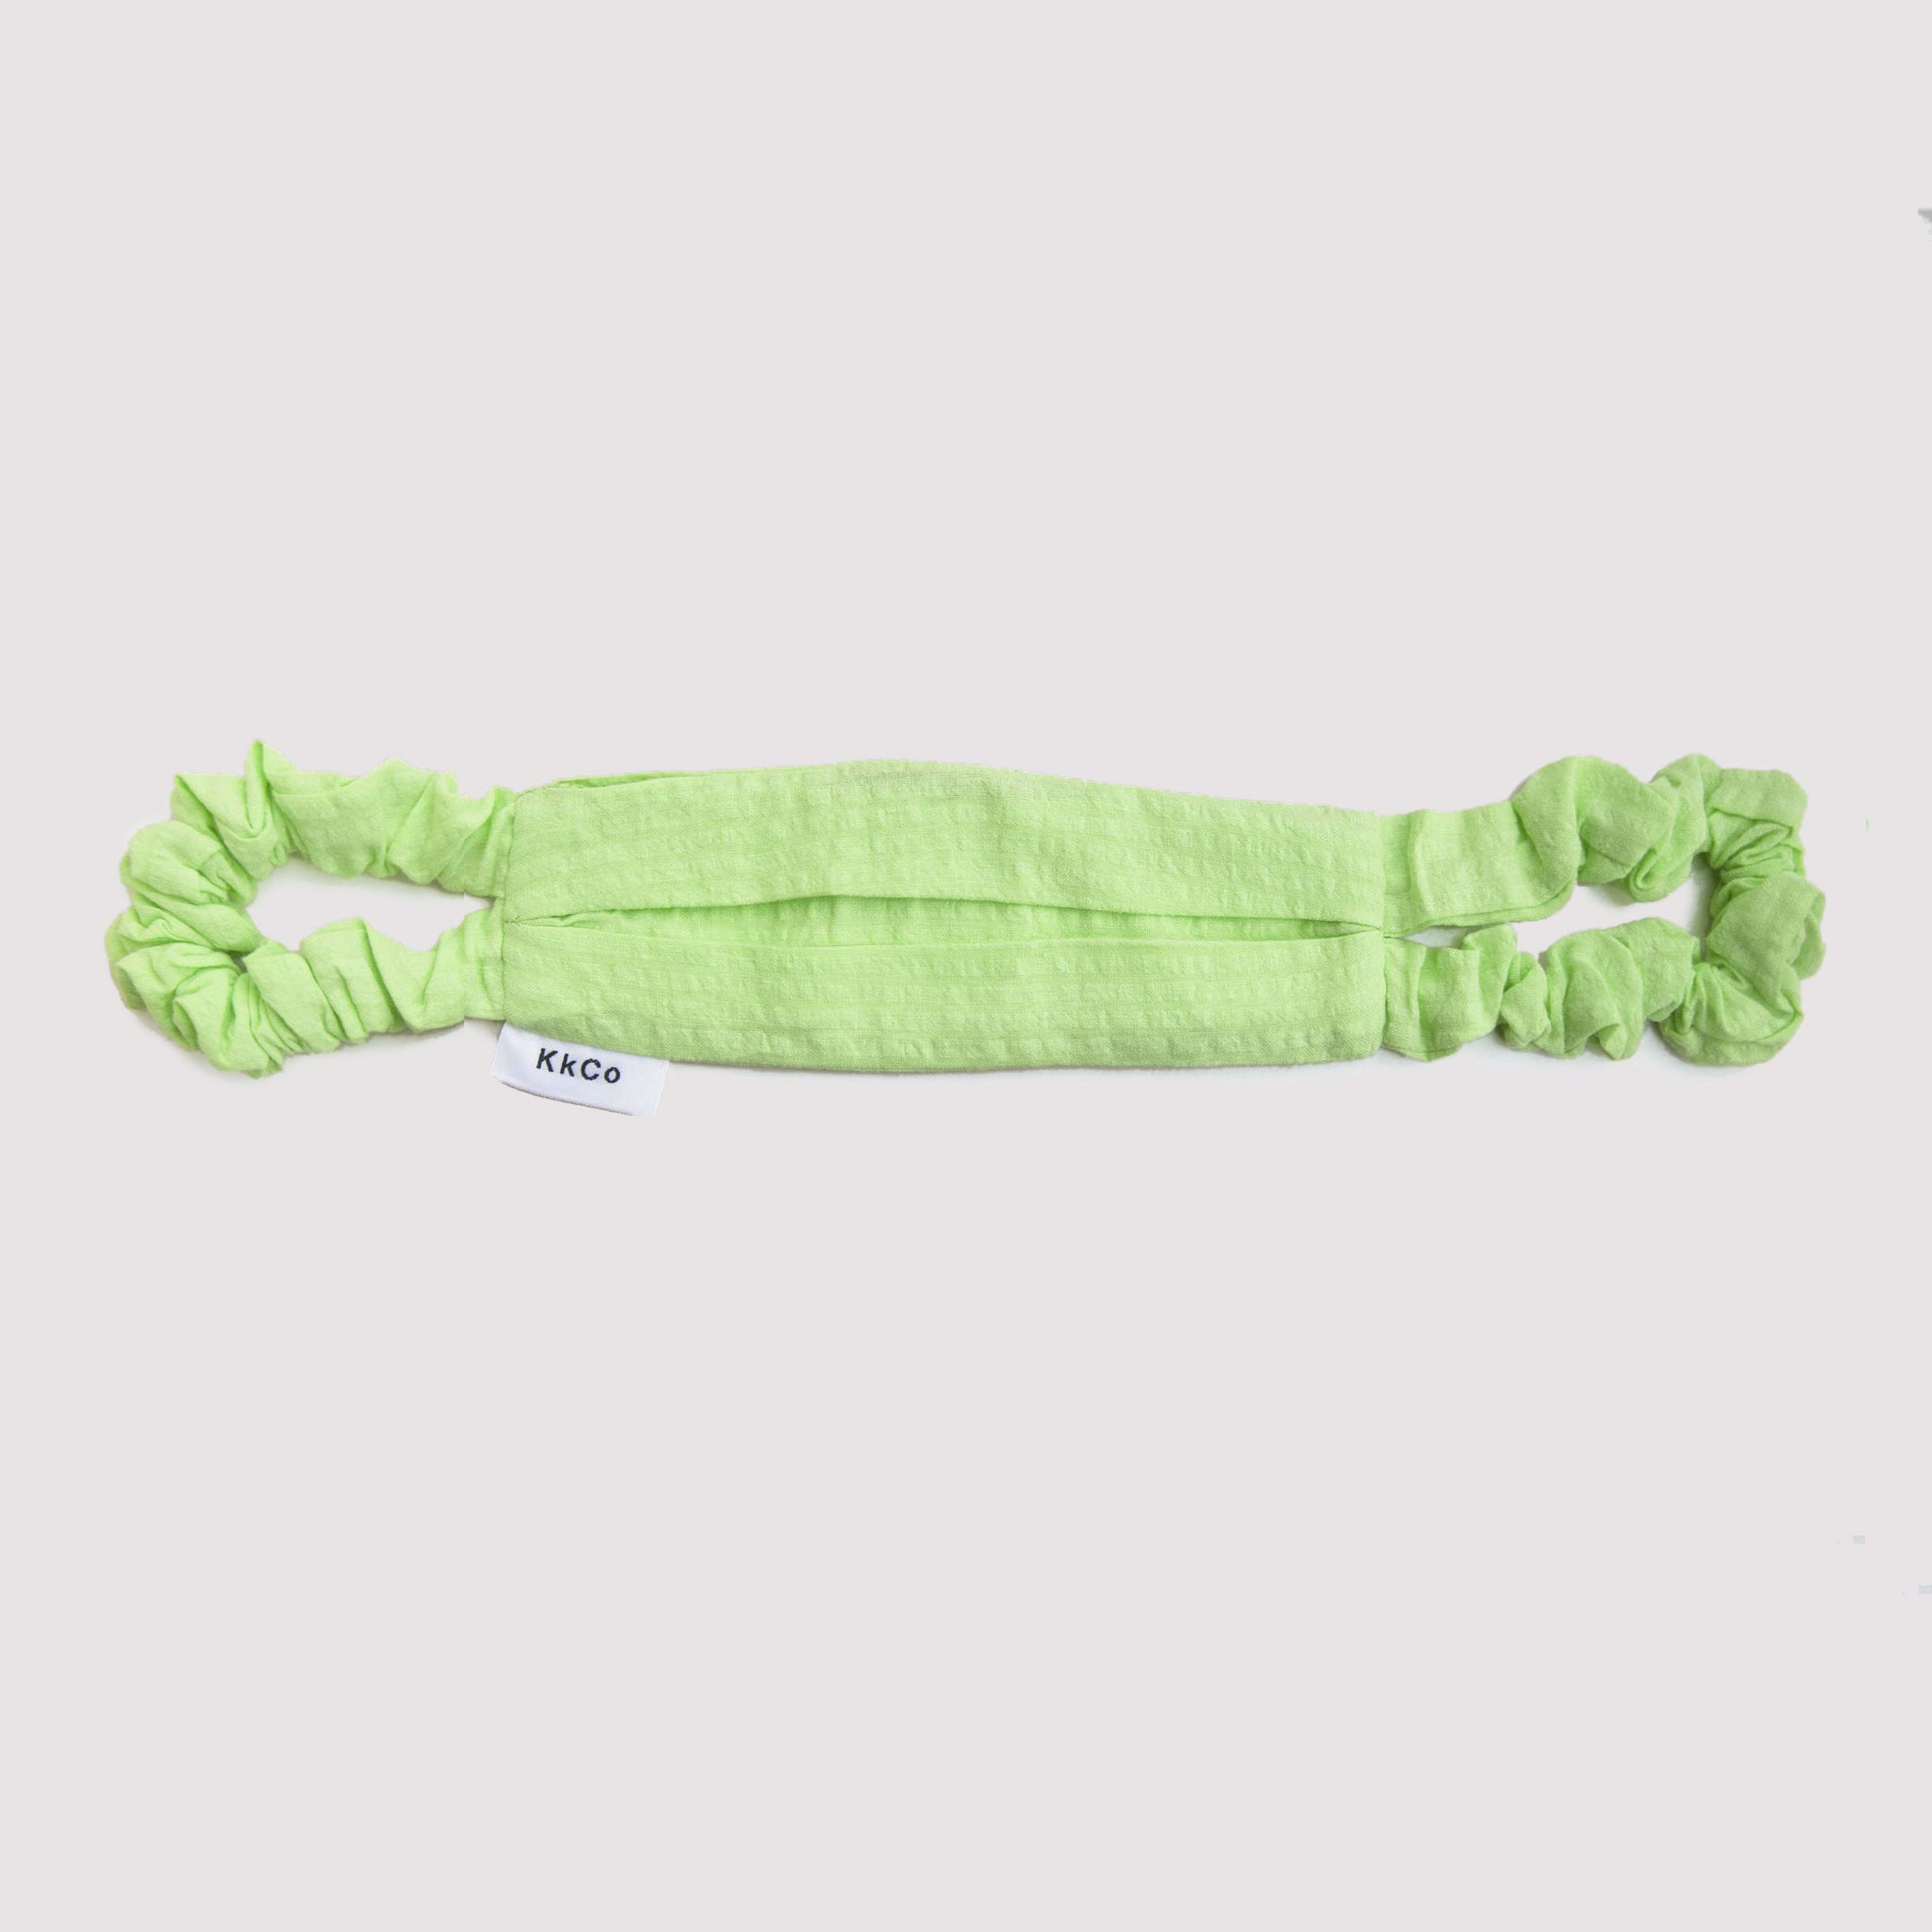 Flat photo of a lime green cloth face covering featured a slightly puckered fabric and scrunchie style ear loops.